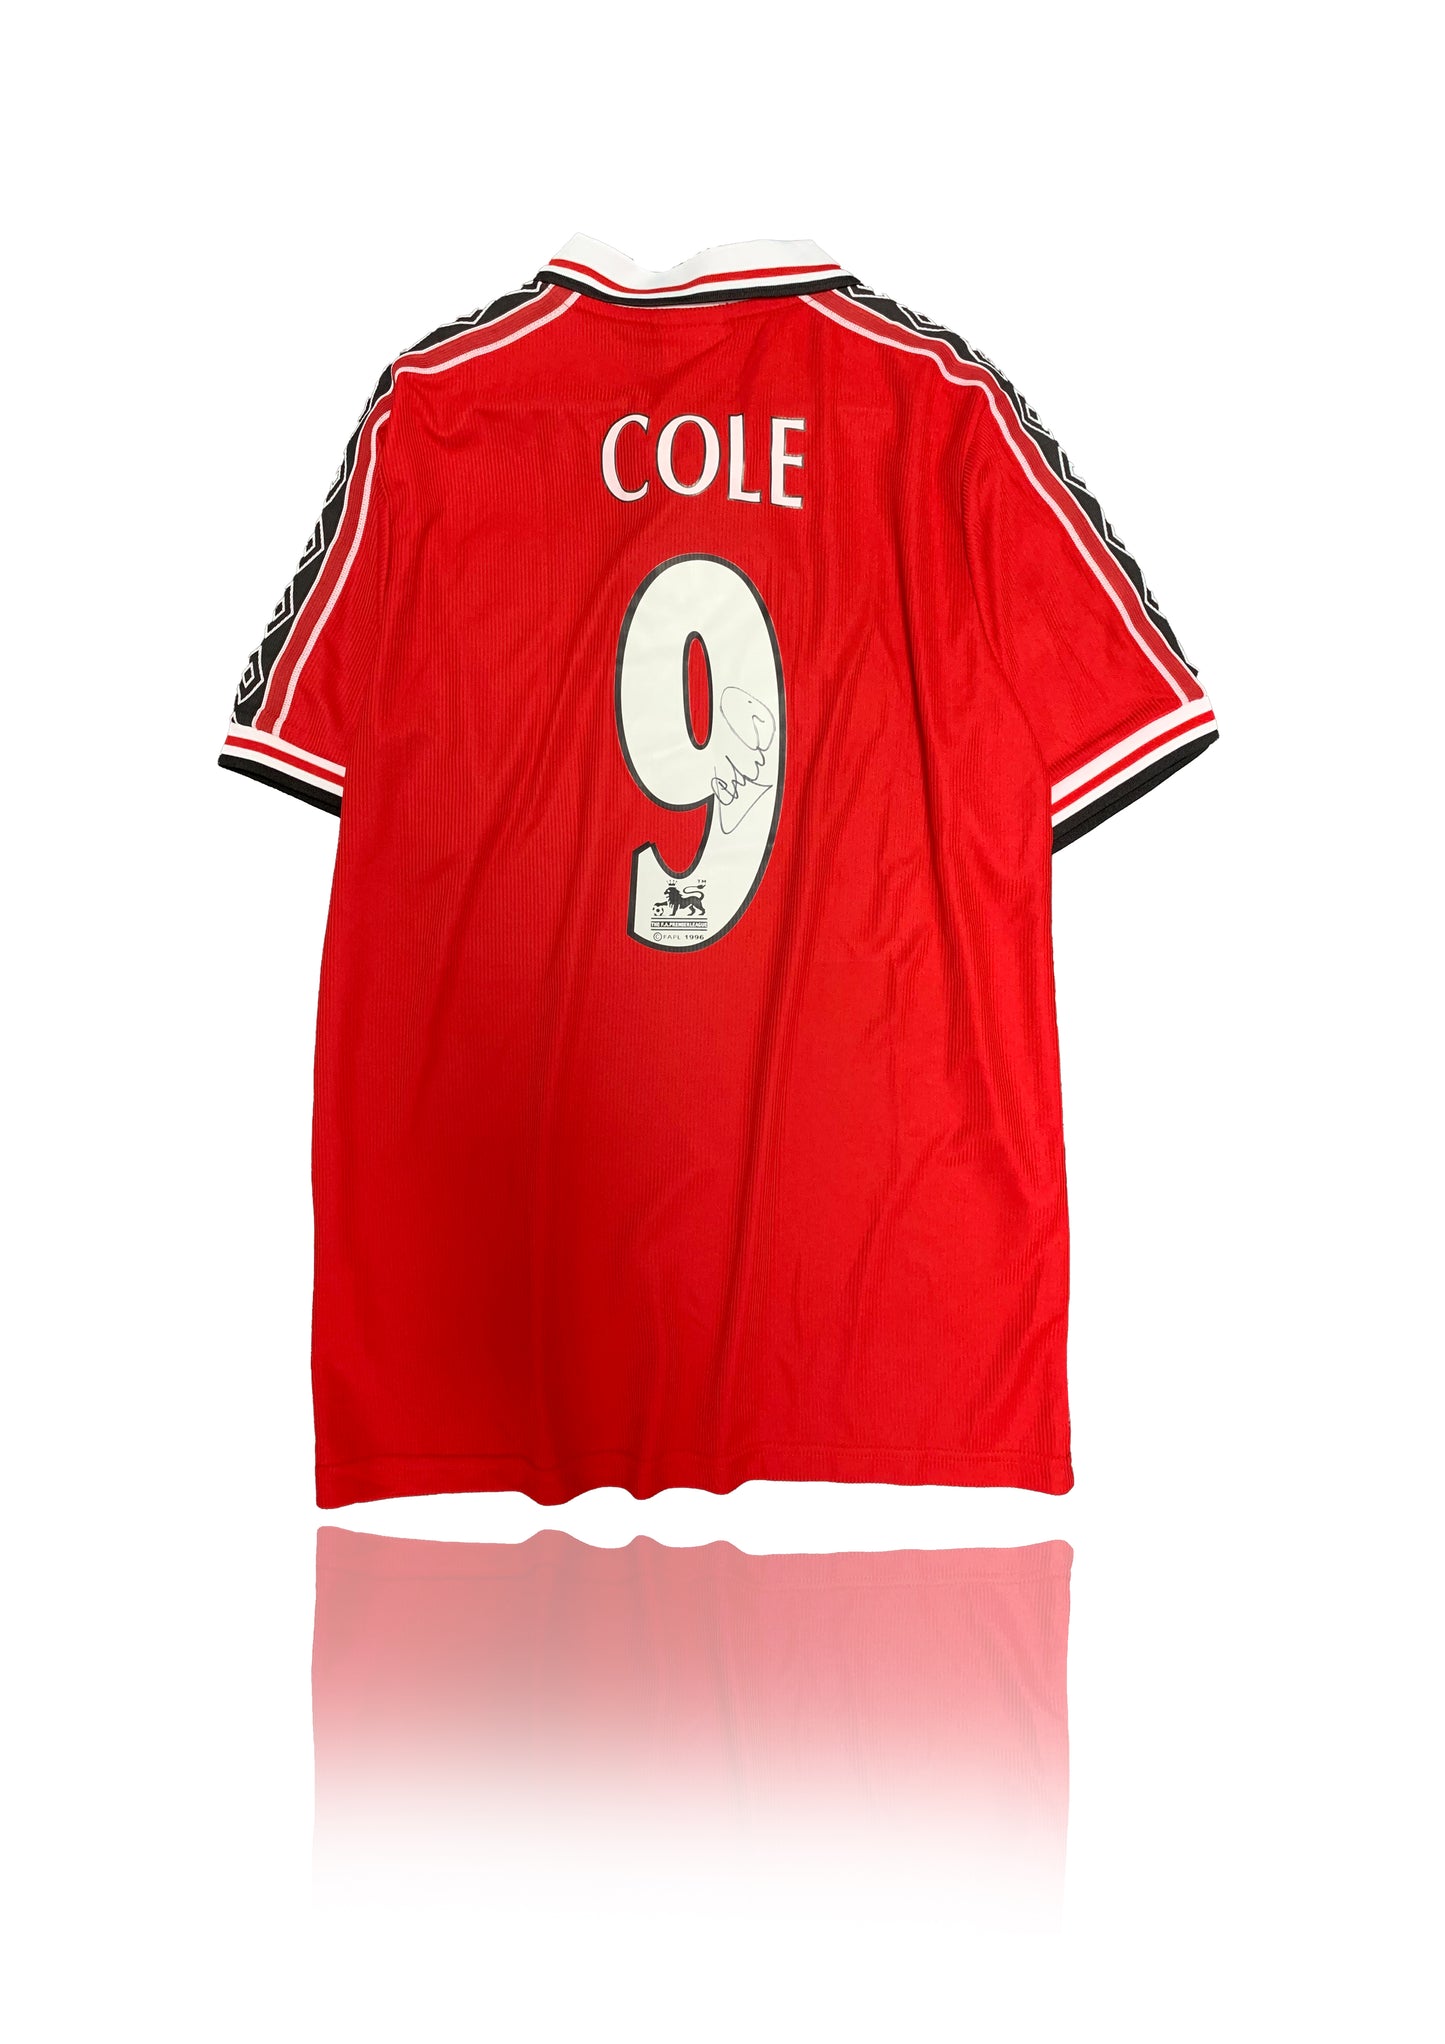 Andrew Cole Signed 1999 Manchester United Shirt